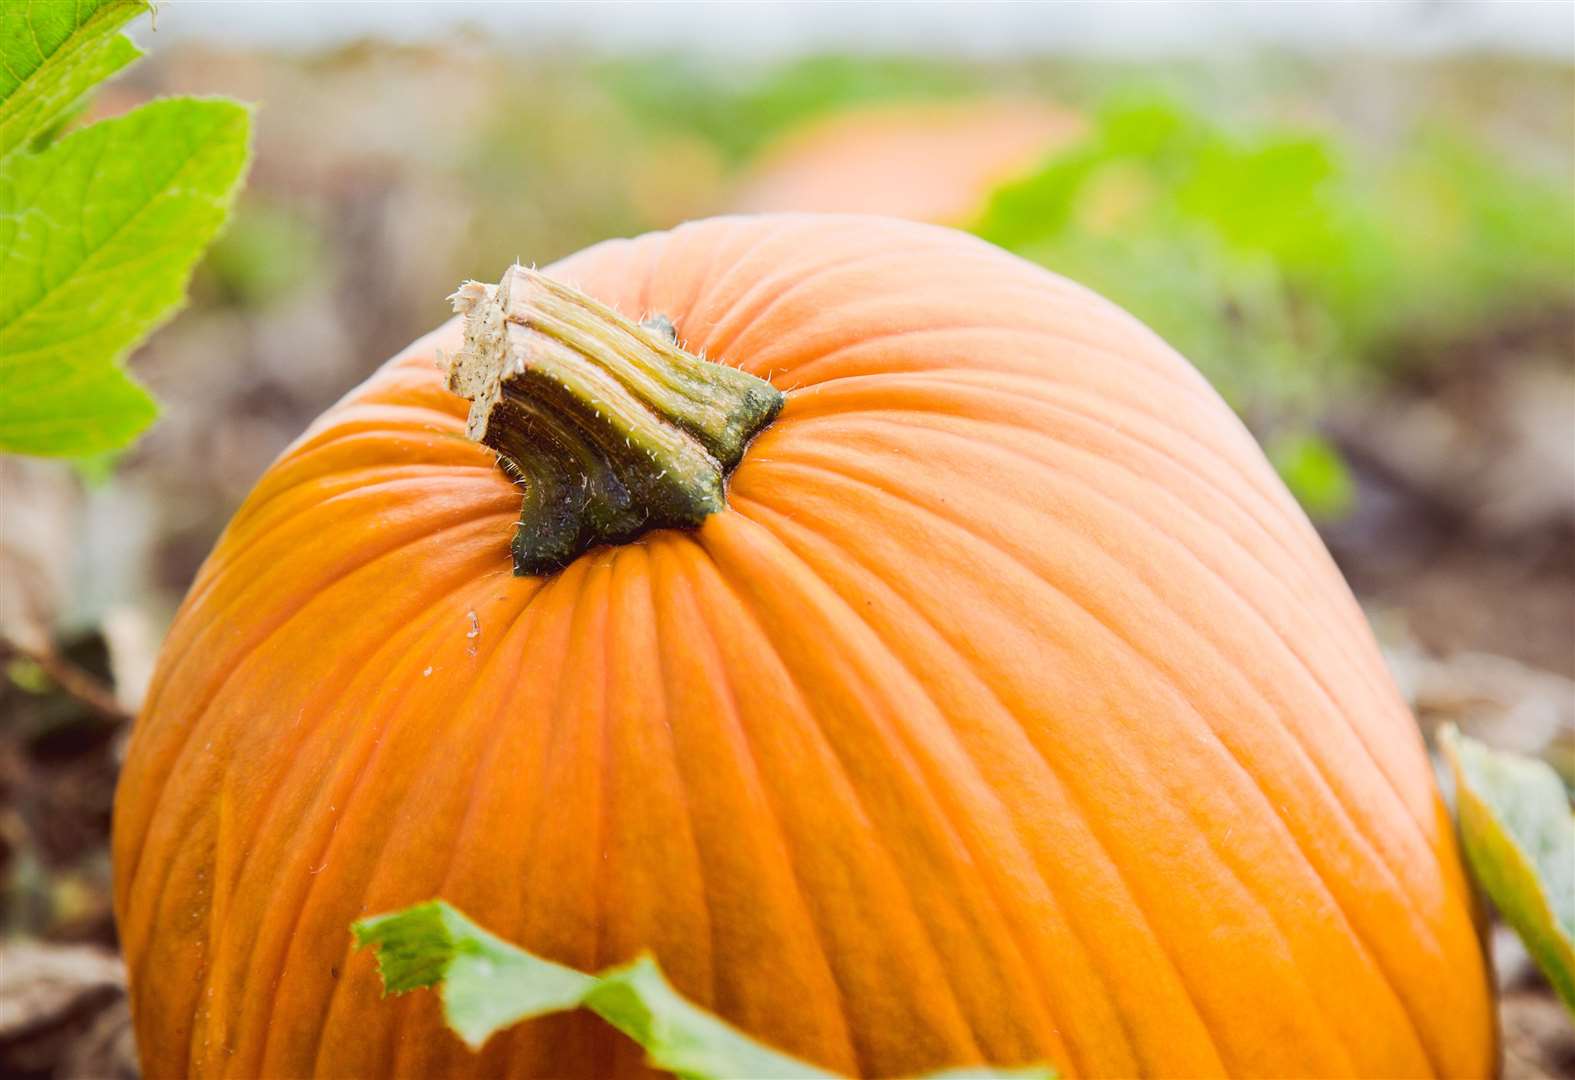 Pick your own pumpkins to take home this Halloween